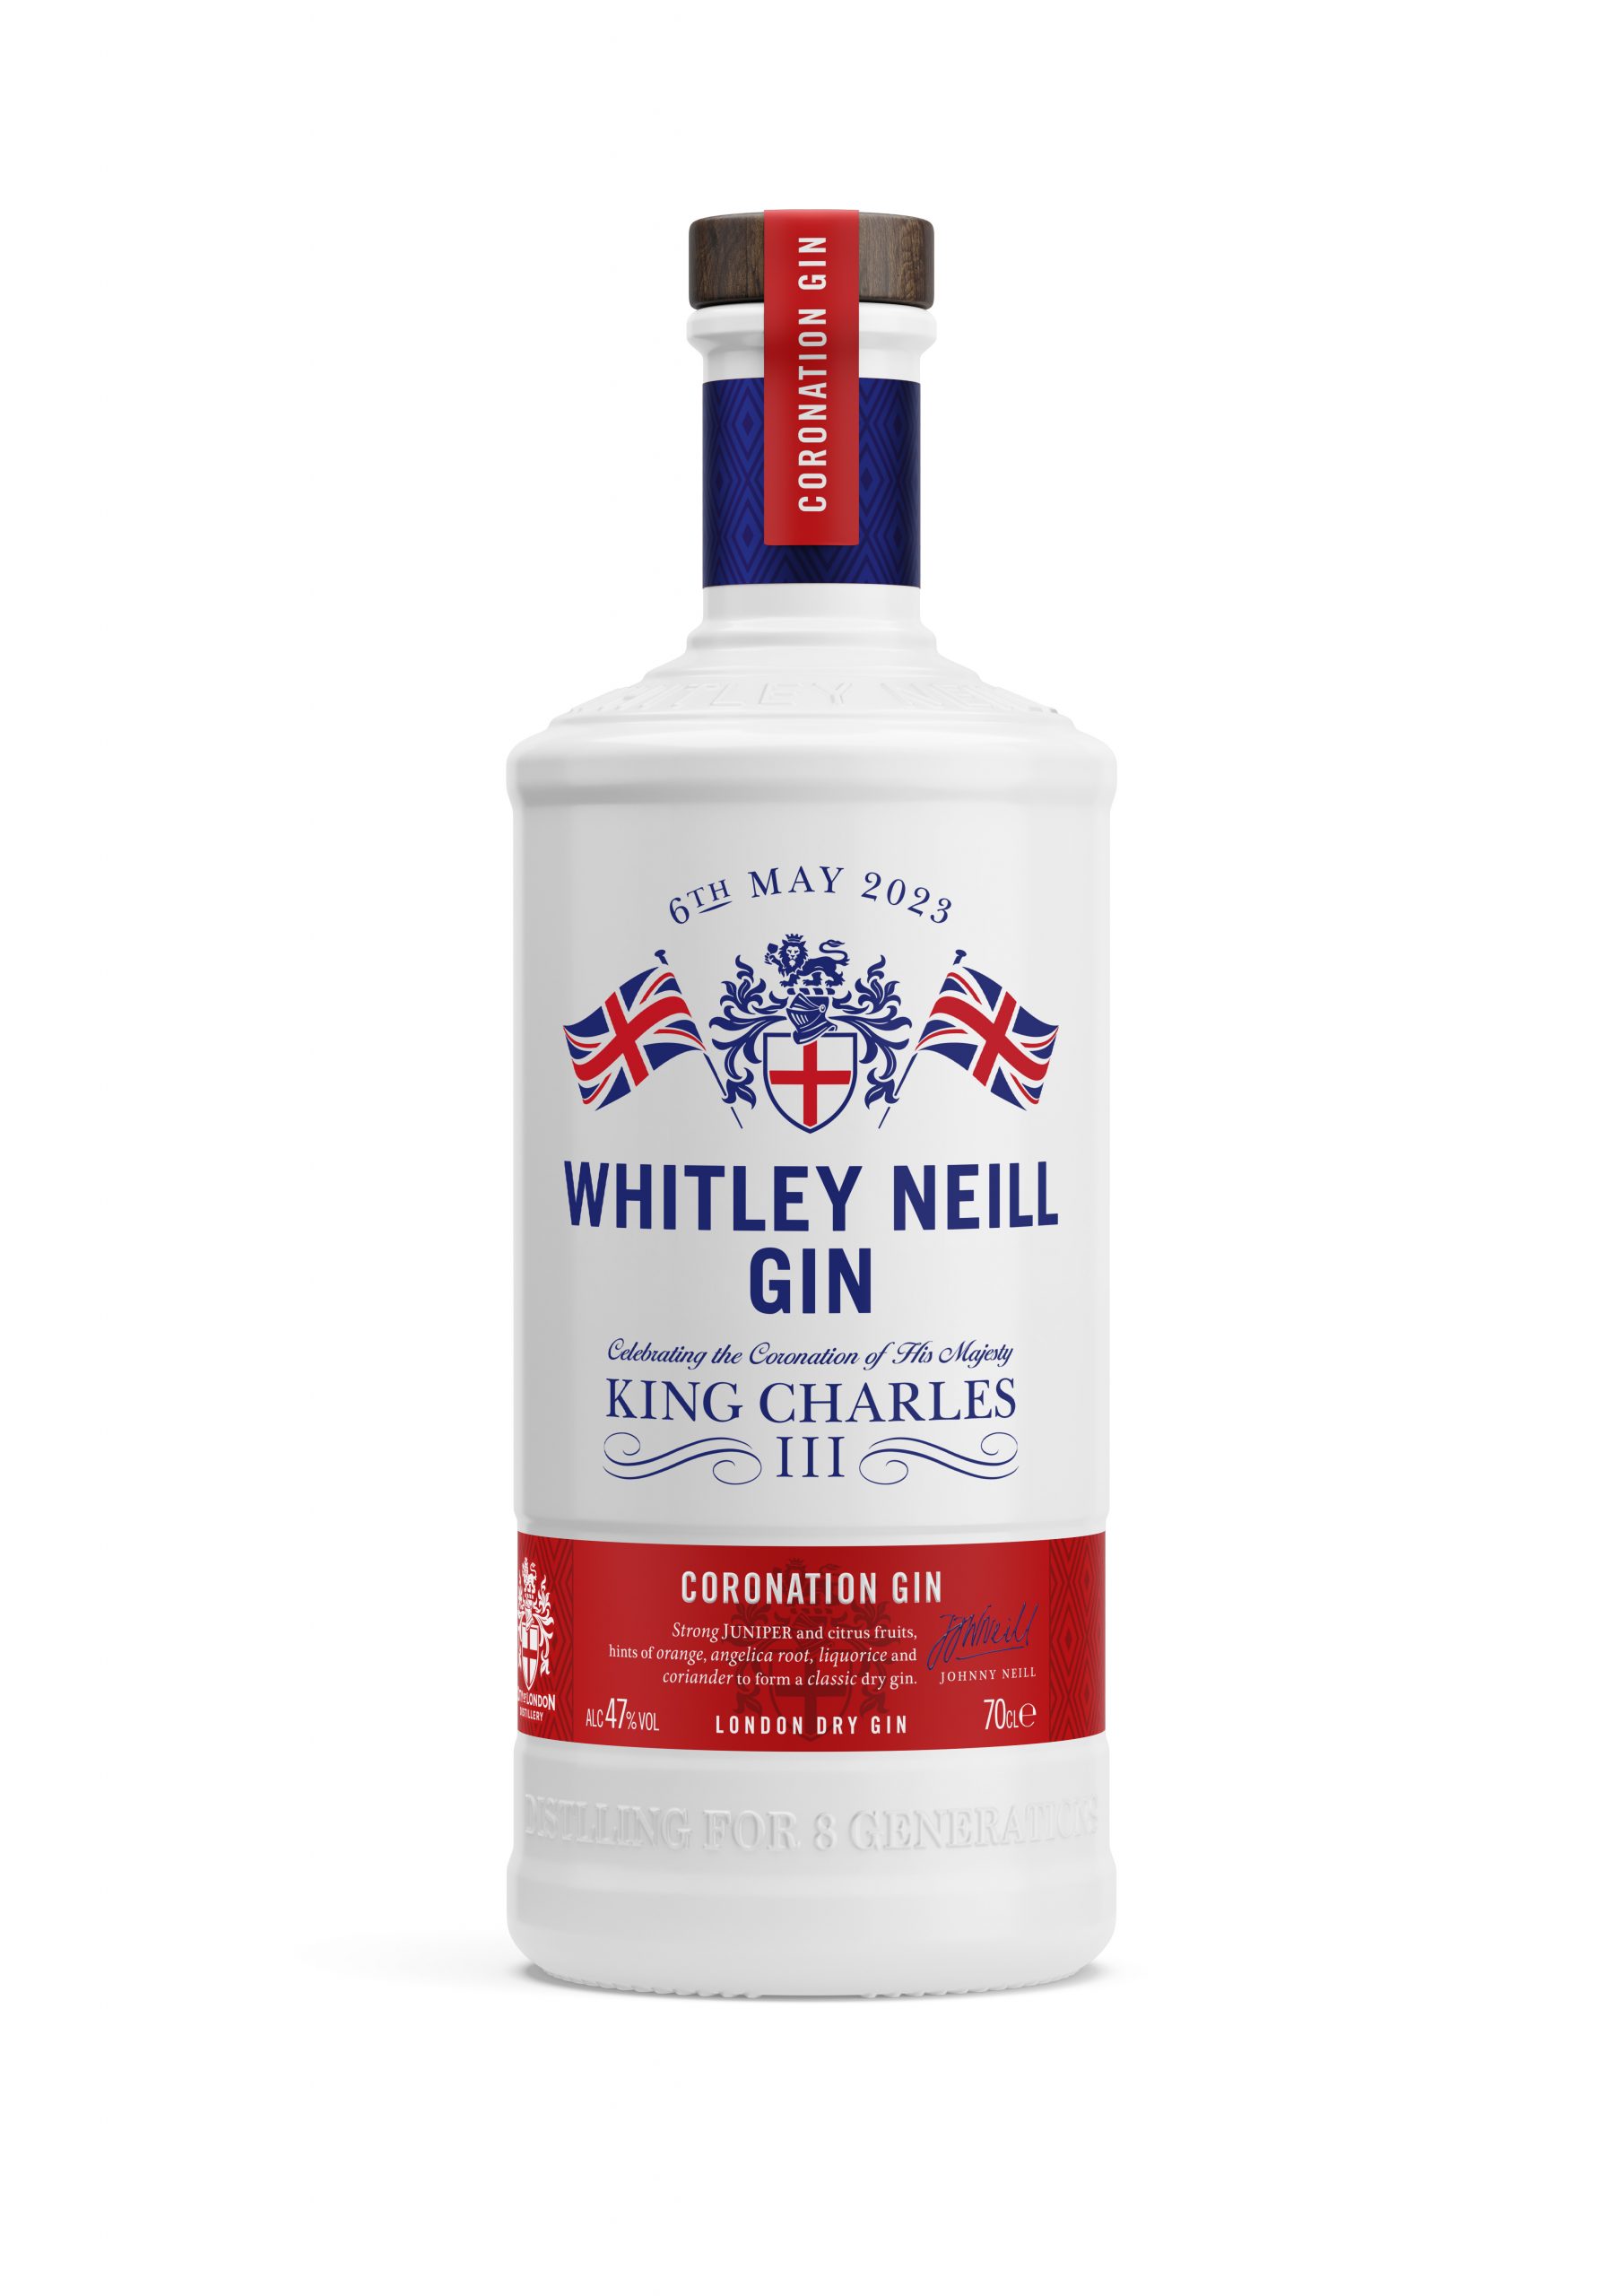 Whitley Neill launches limited edition gin bottle for coronation